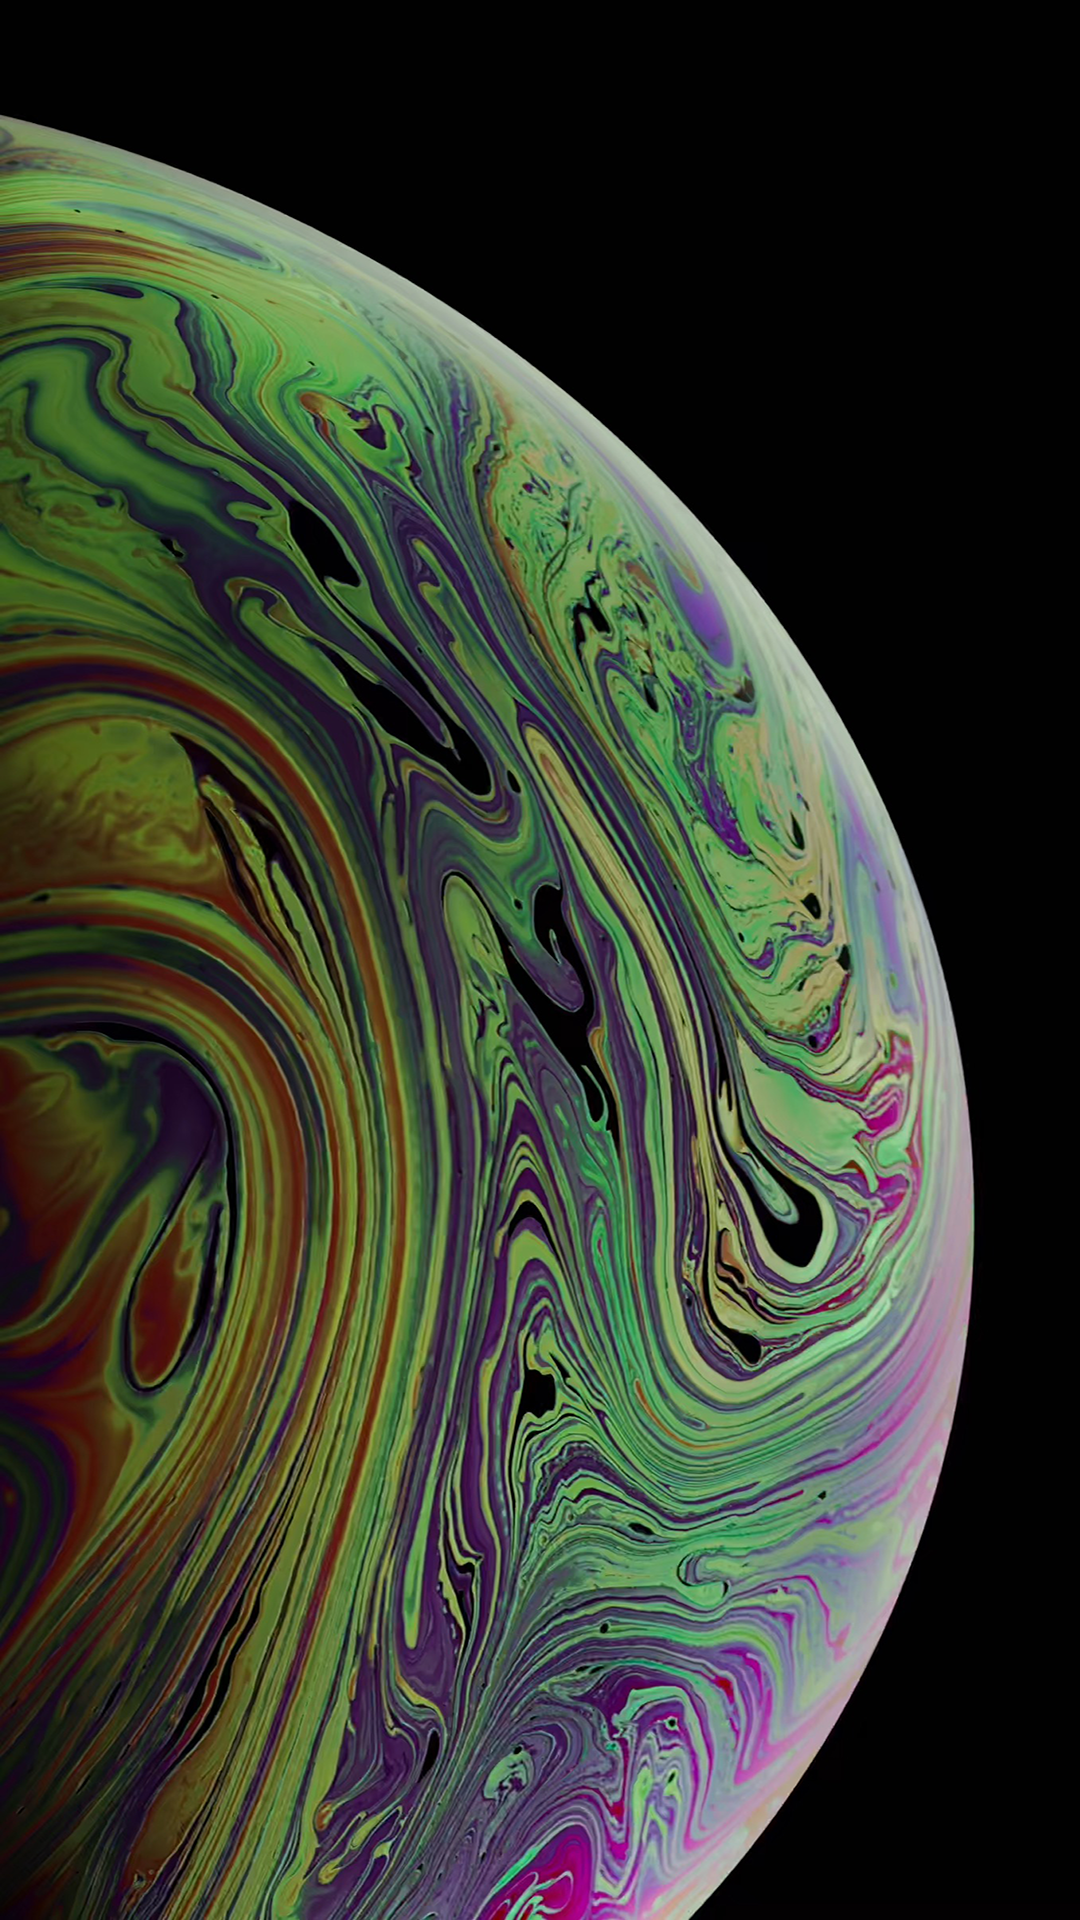 Wallpapers iPhone Xs iPhone Xs Max and iPhone Xr 1080x1920